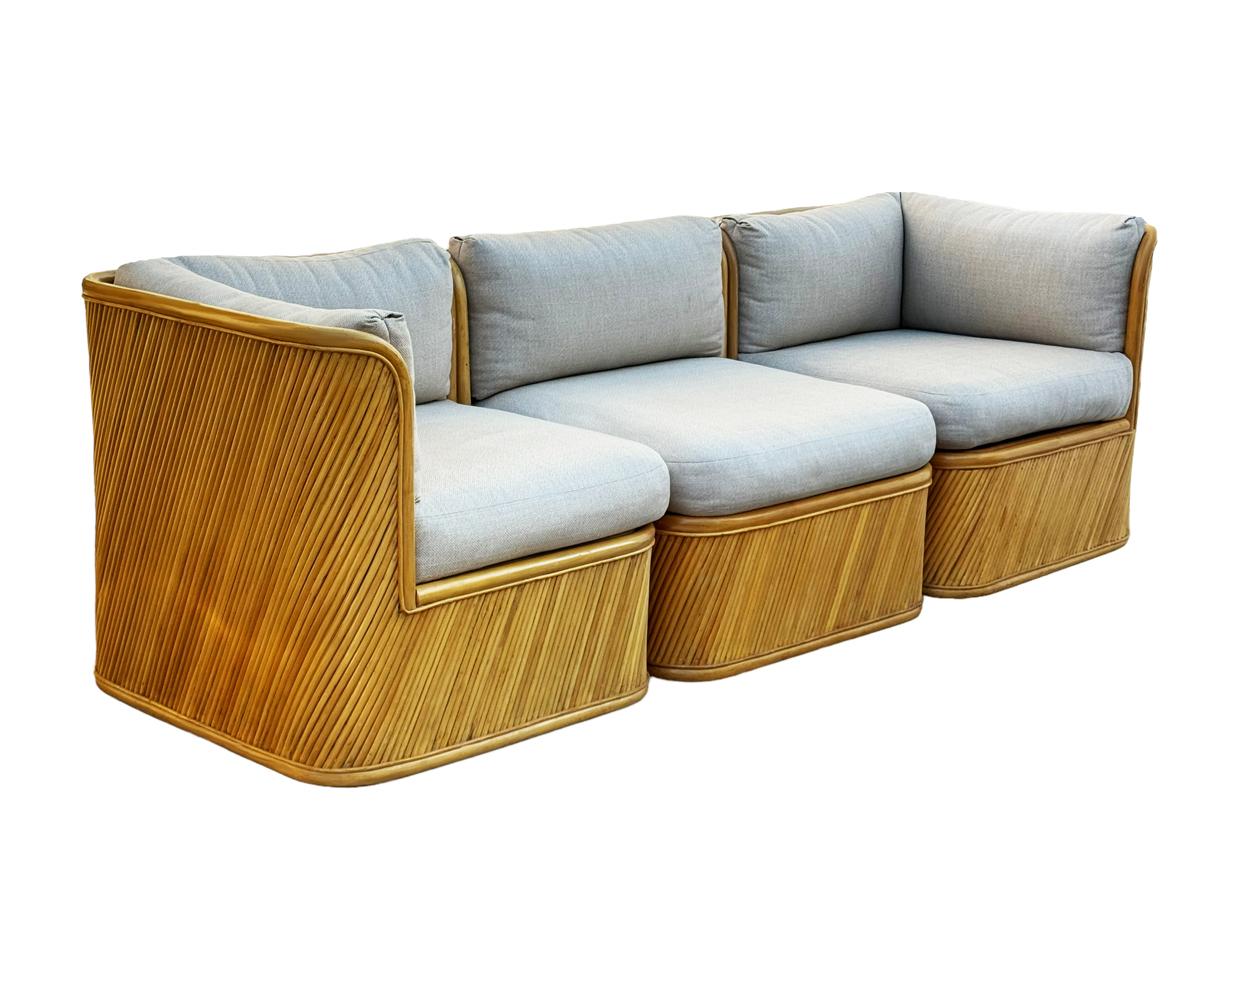 Late 20th Century Mid-Century Modern Bamboo Pencil Reed Modular or Sectional Sofa with New Cushion For Sale